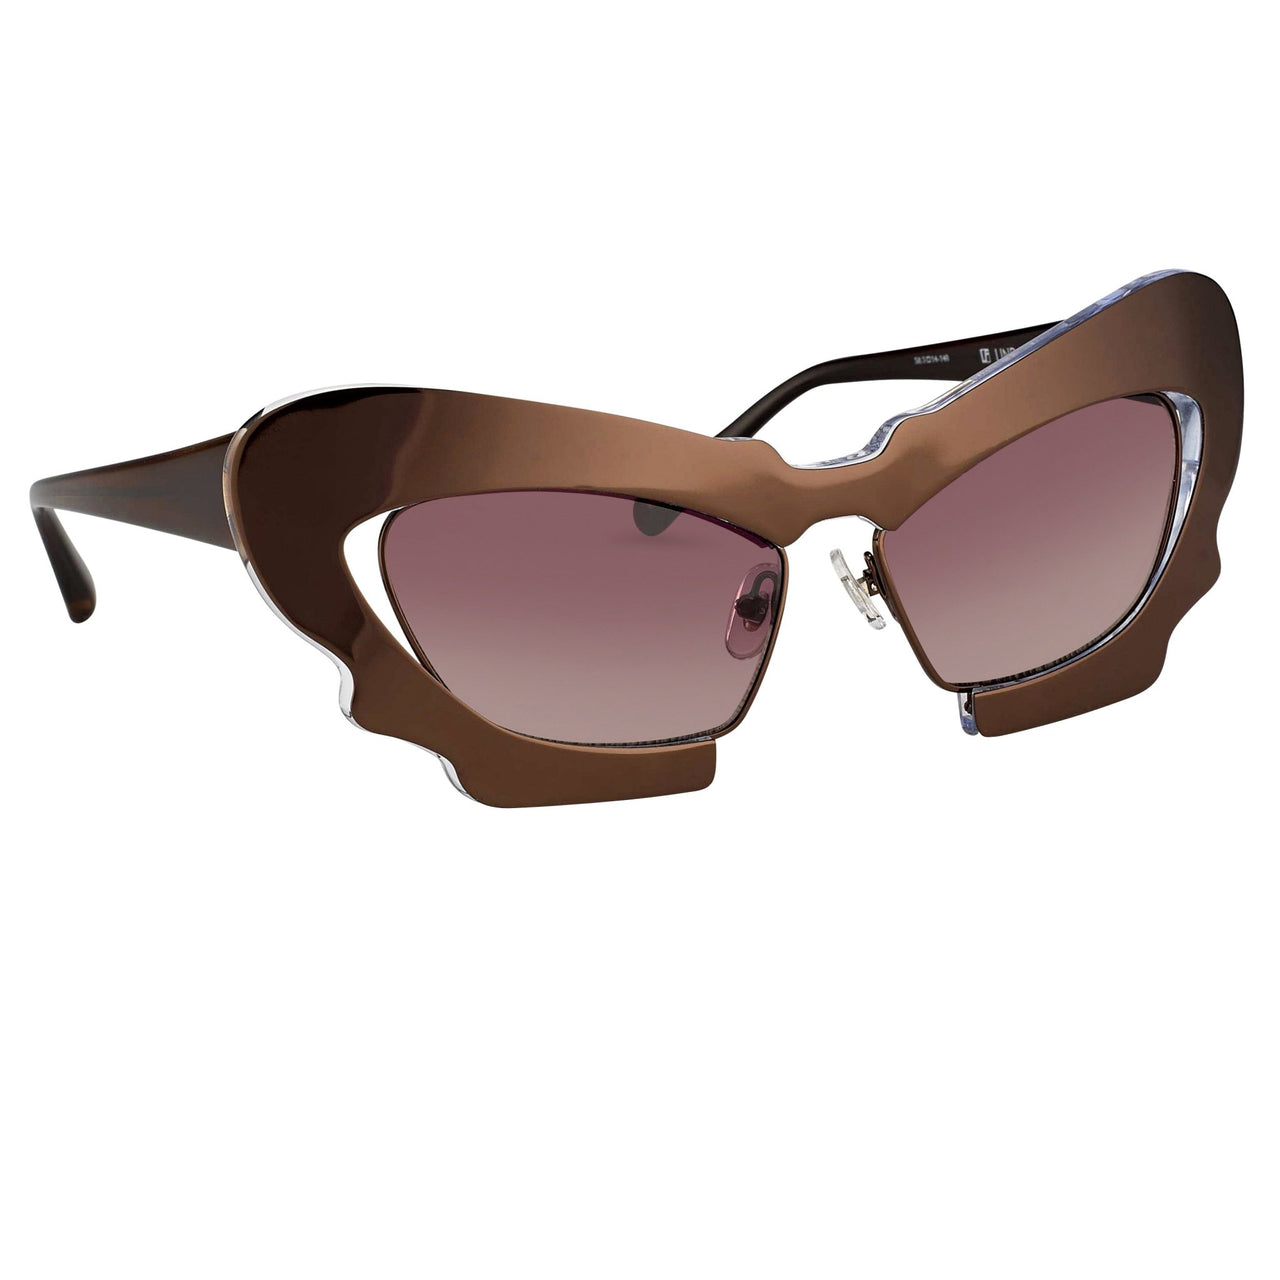 Prabal Gurung Sunglasses Female Cat Eye Chocolate Bronze Category 2 Red Gradient Lenses PG1C12SUN - Watches & Crystals